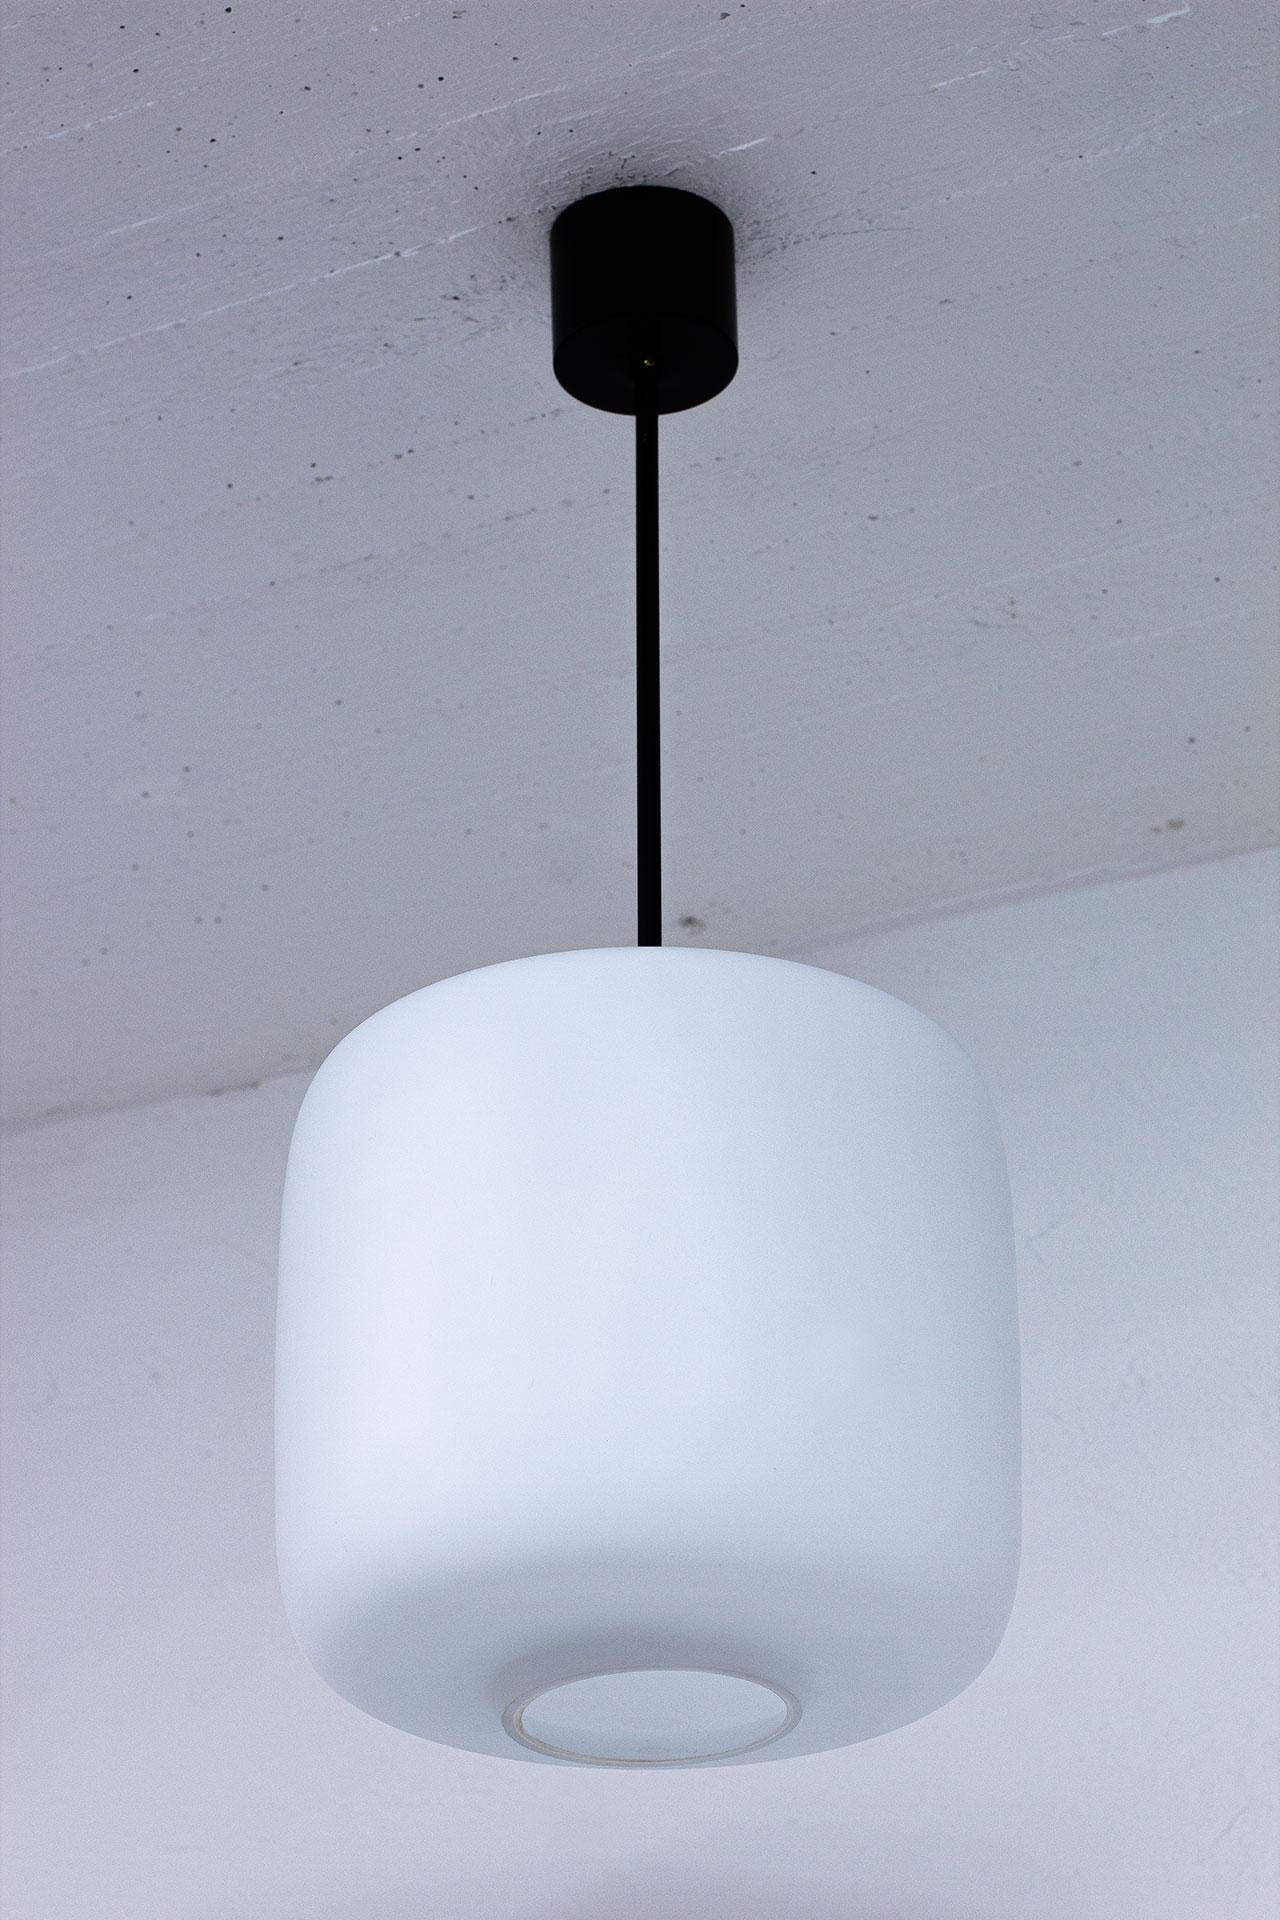 20th Century Swedish Pair of Black Metal & White Matte Opaline Glass Pendant Lamps, 1950s For Sale